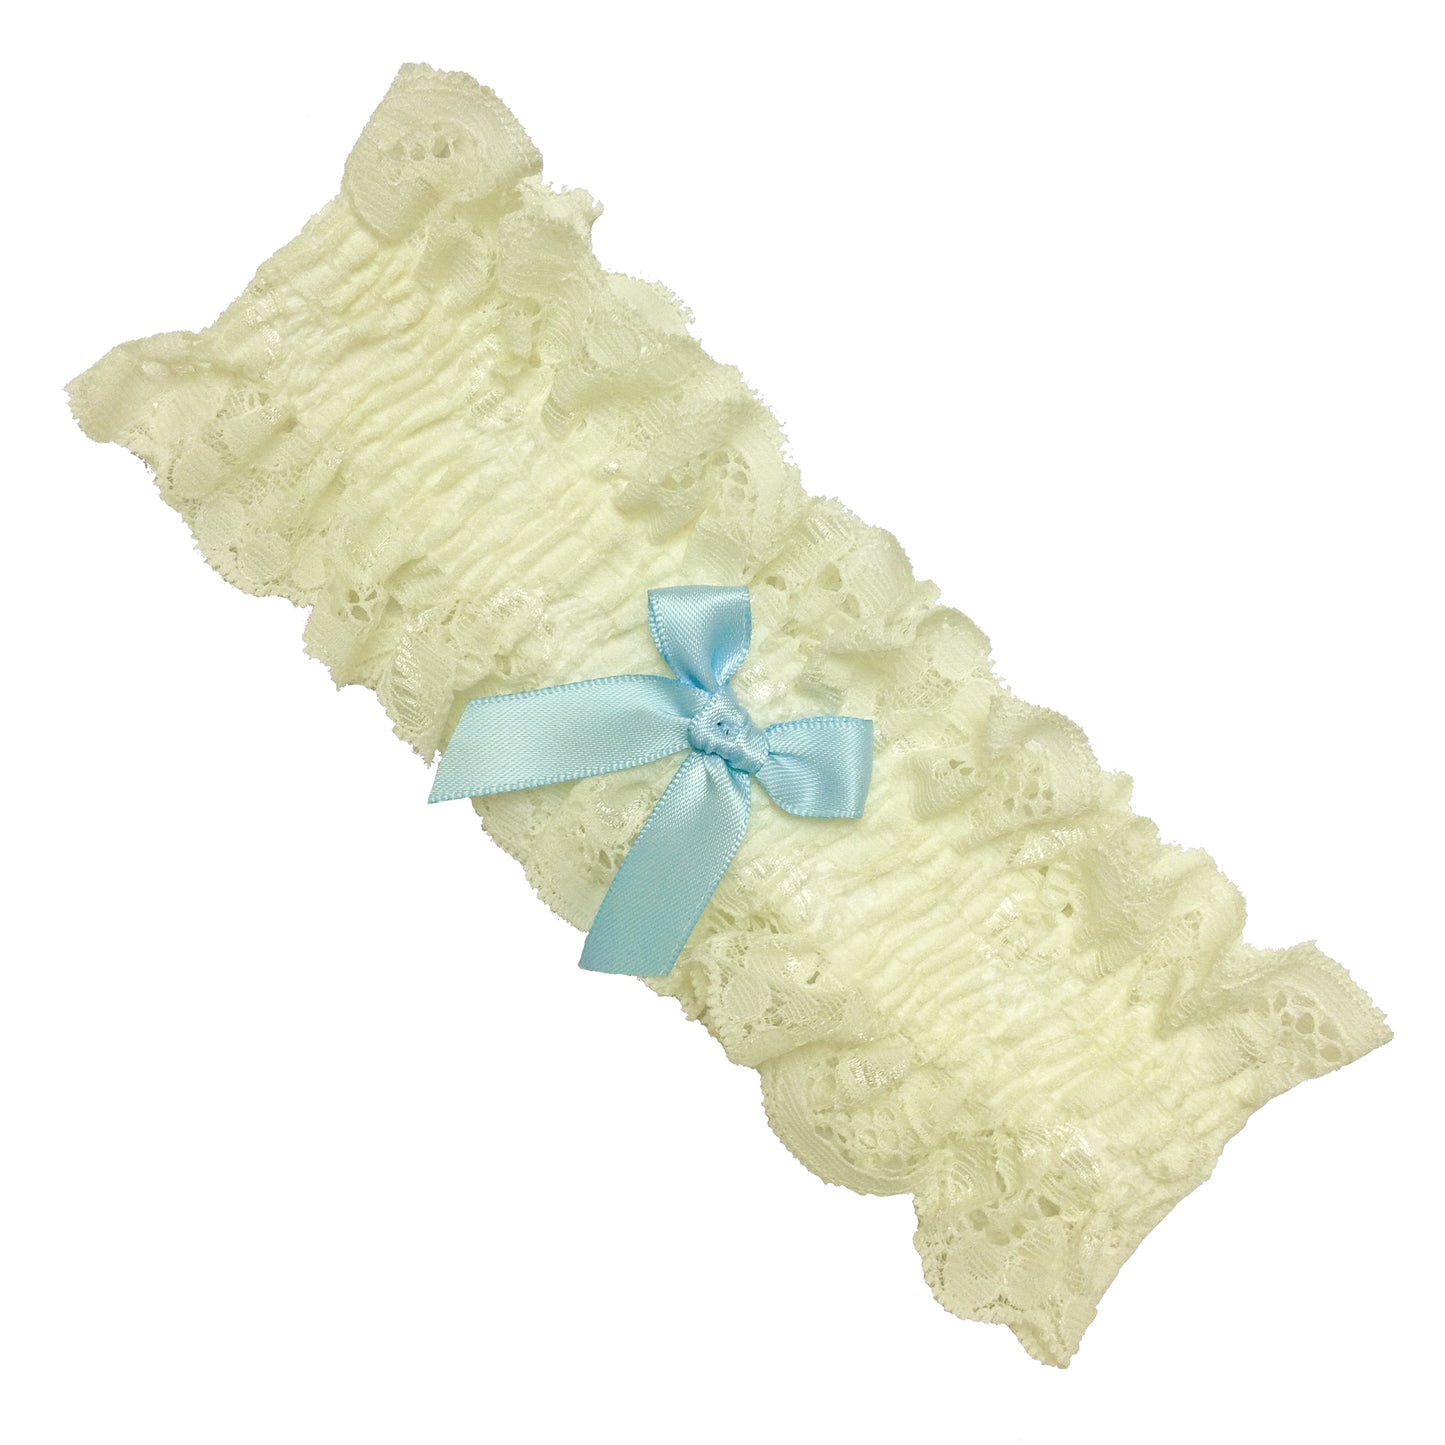 Trasparenze Sposa - ivory lace leg garter in with a pale blue bow